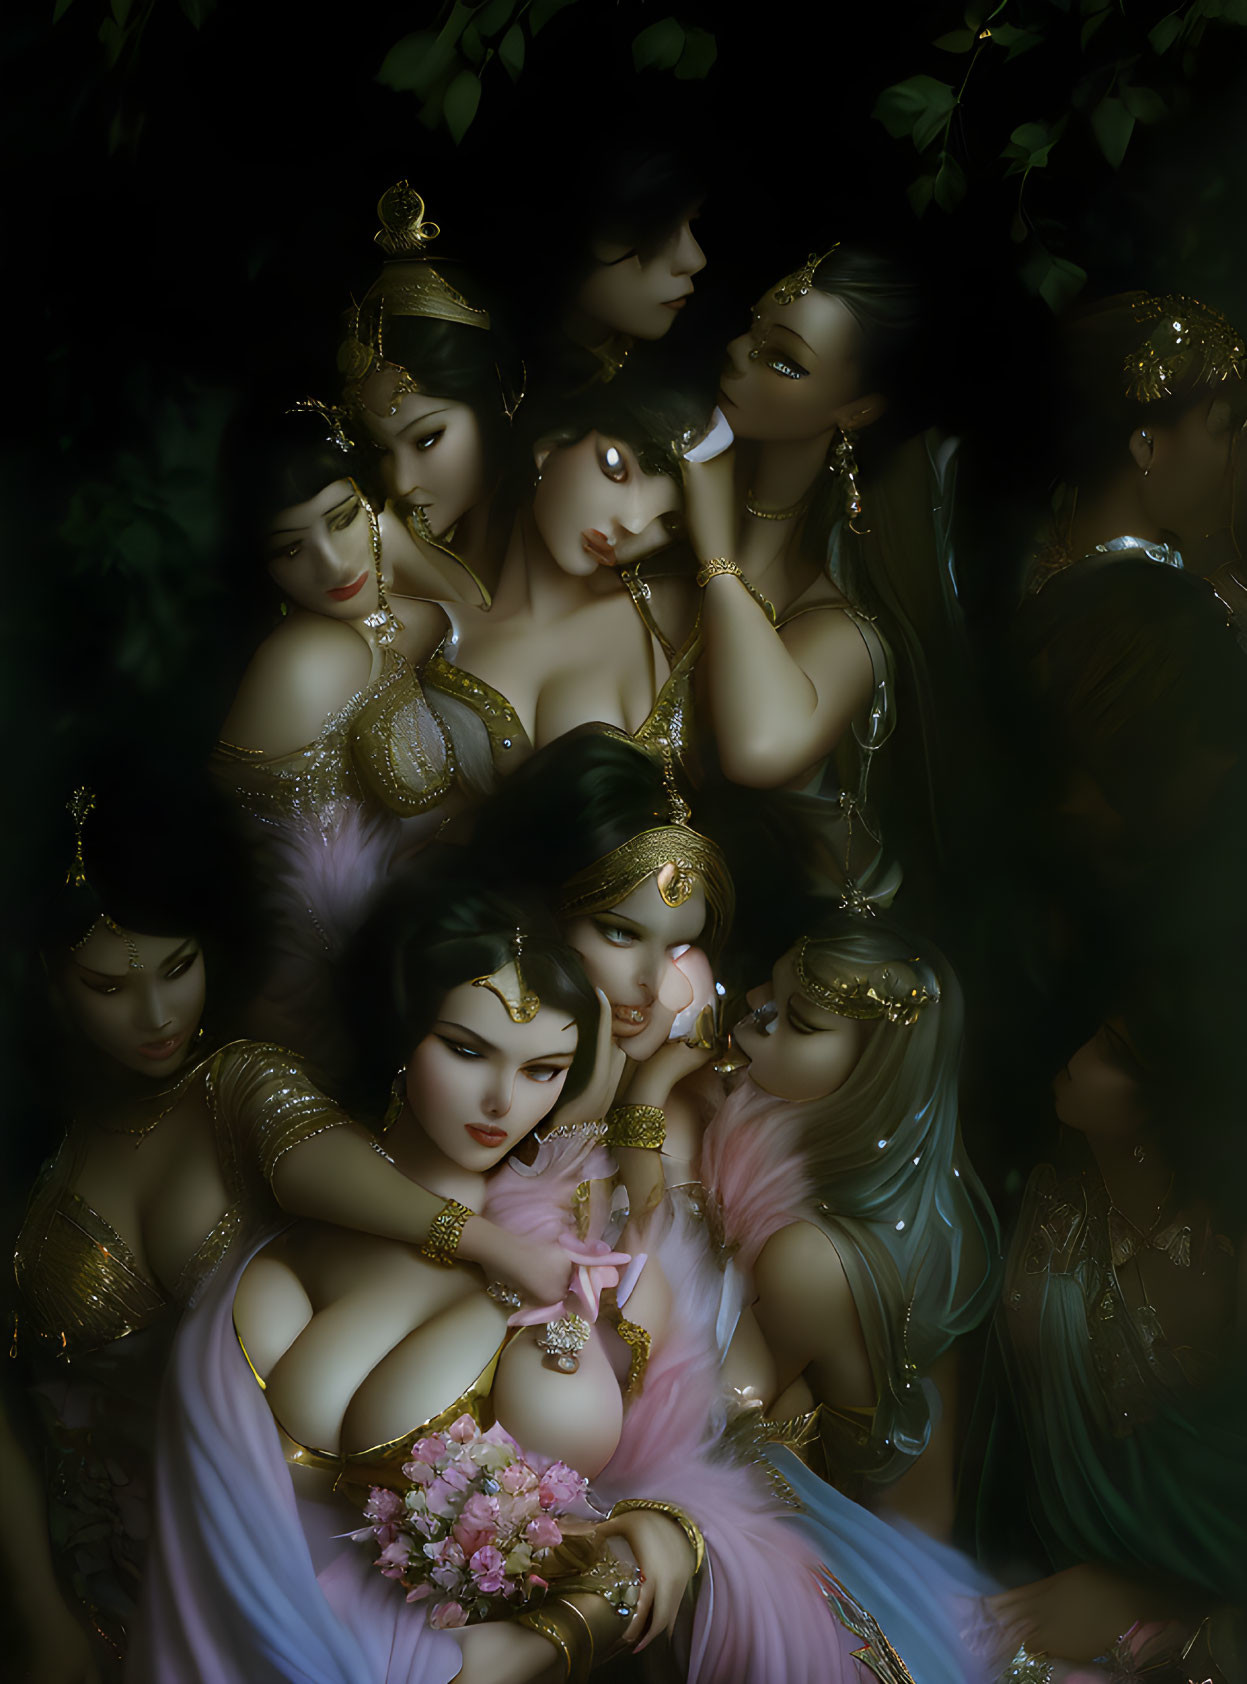 Stylized women in gold and pastel attire with an ethereal appearance, surrounded by darkness and